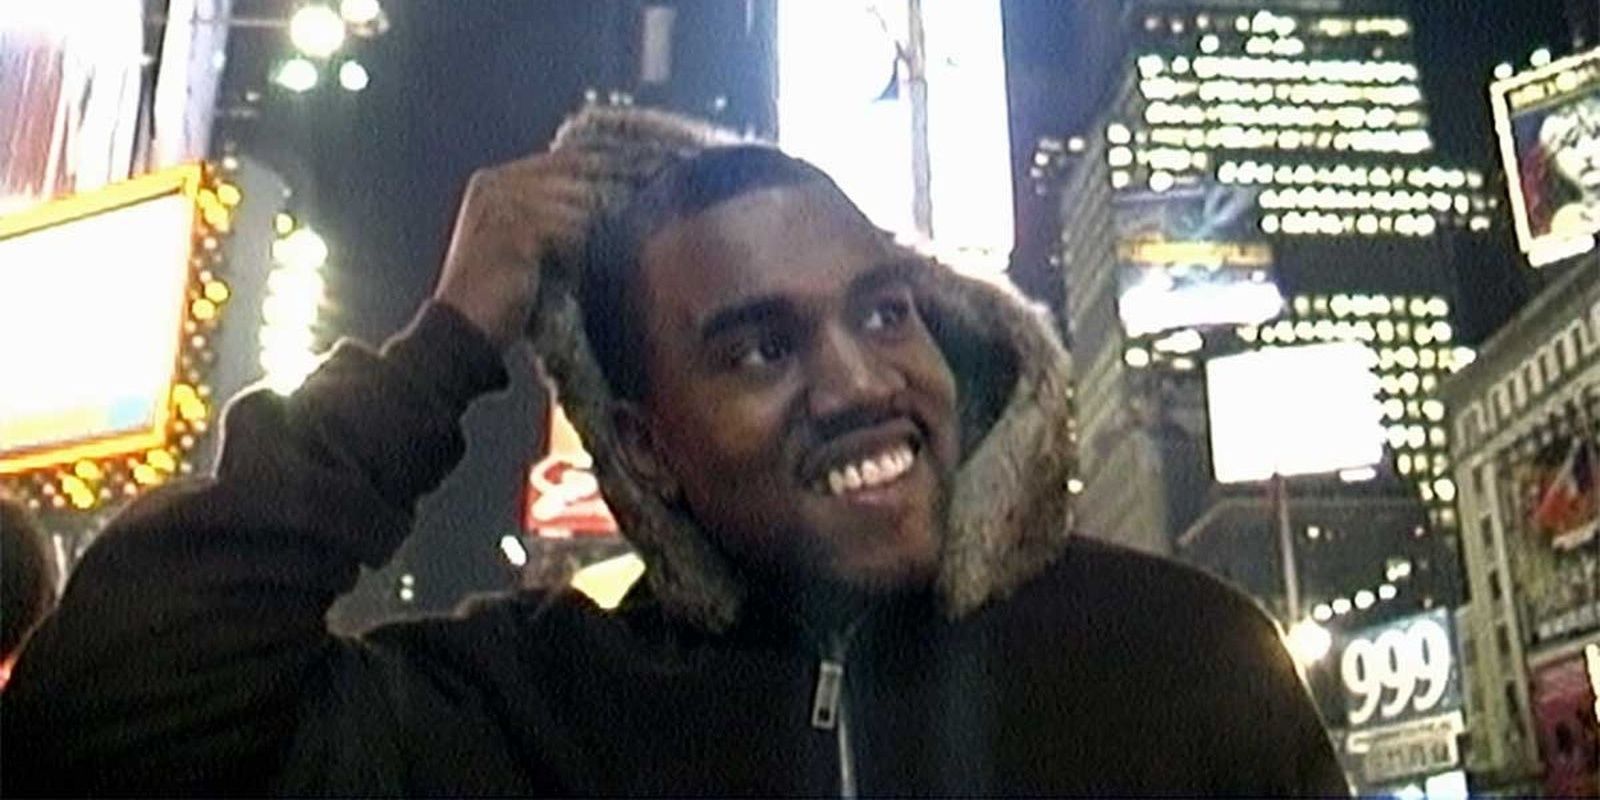 Kanye West walks through a city in footage from jeen-yuhs: A Kanye Trilogy